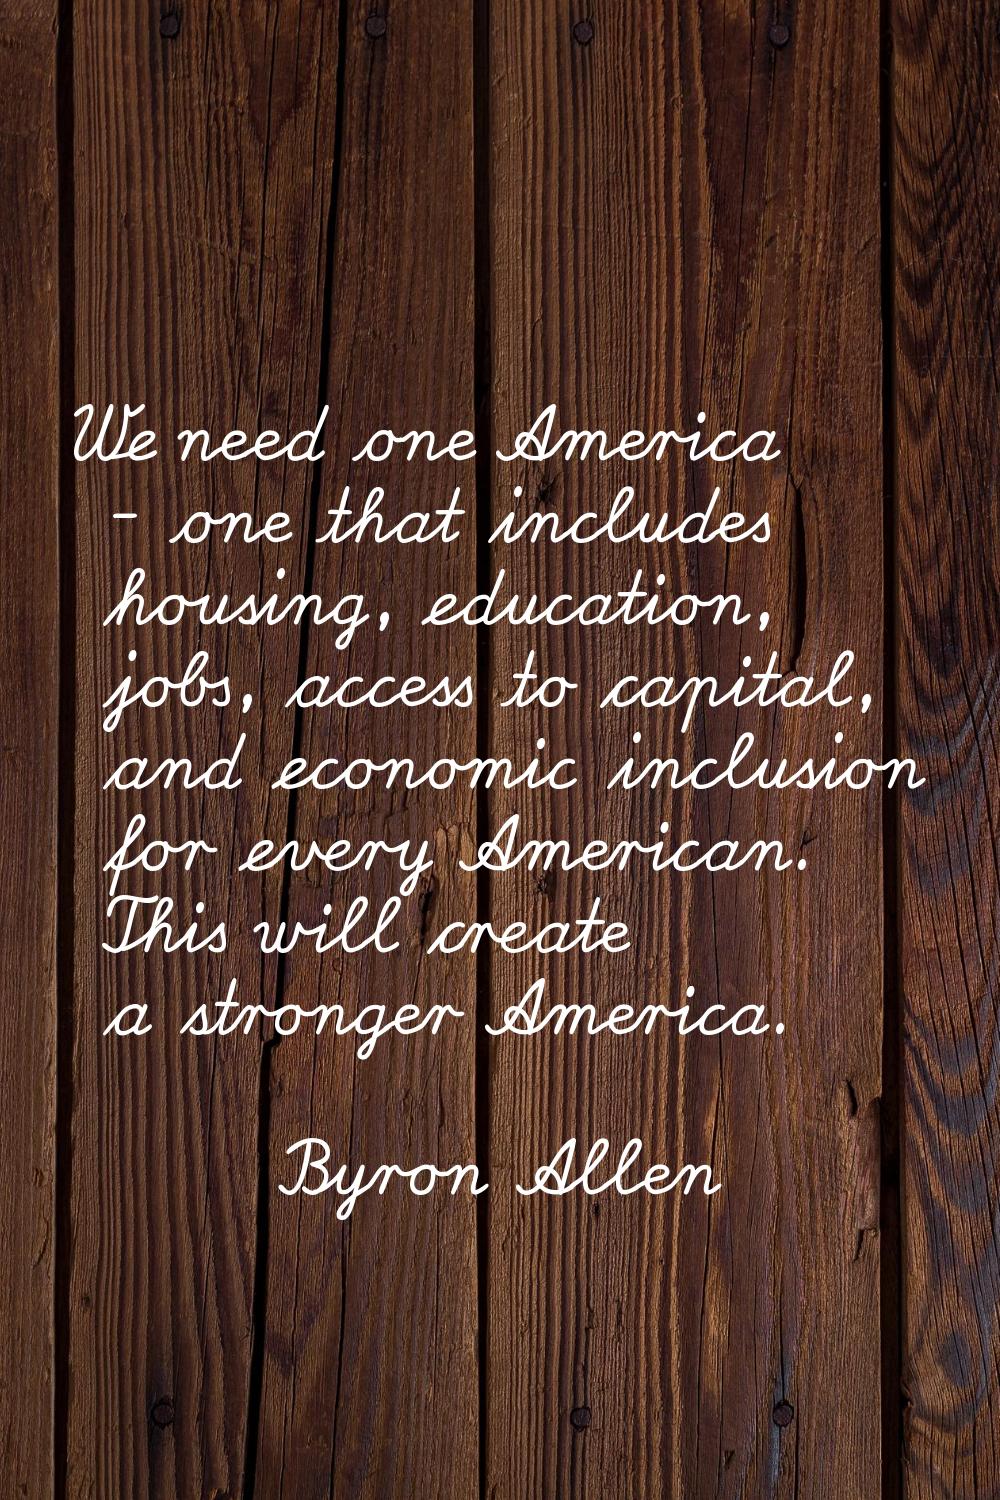 We need one America - one that includes housing, education, jobs, access to capital, and economic i